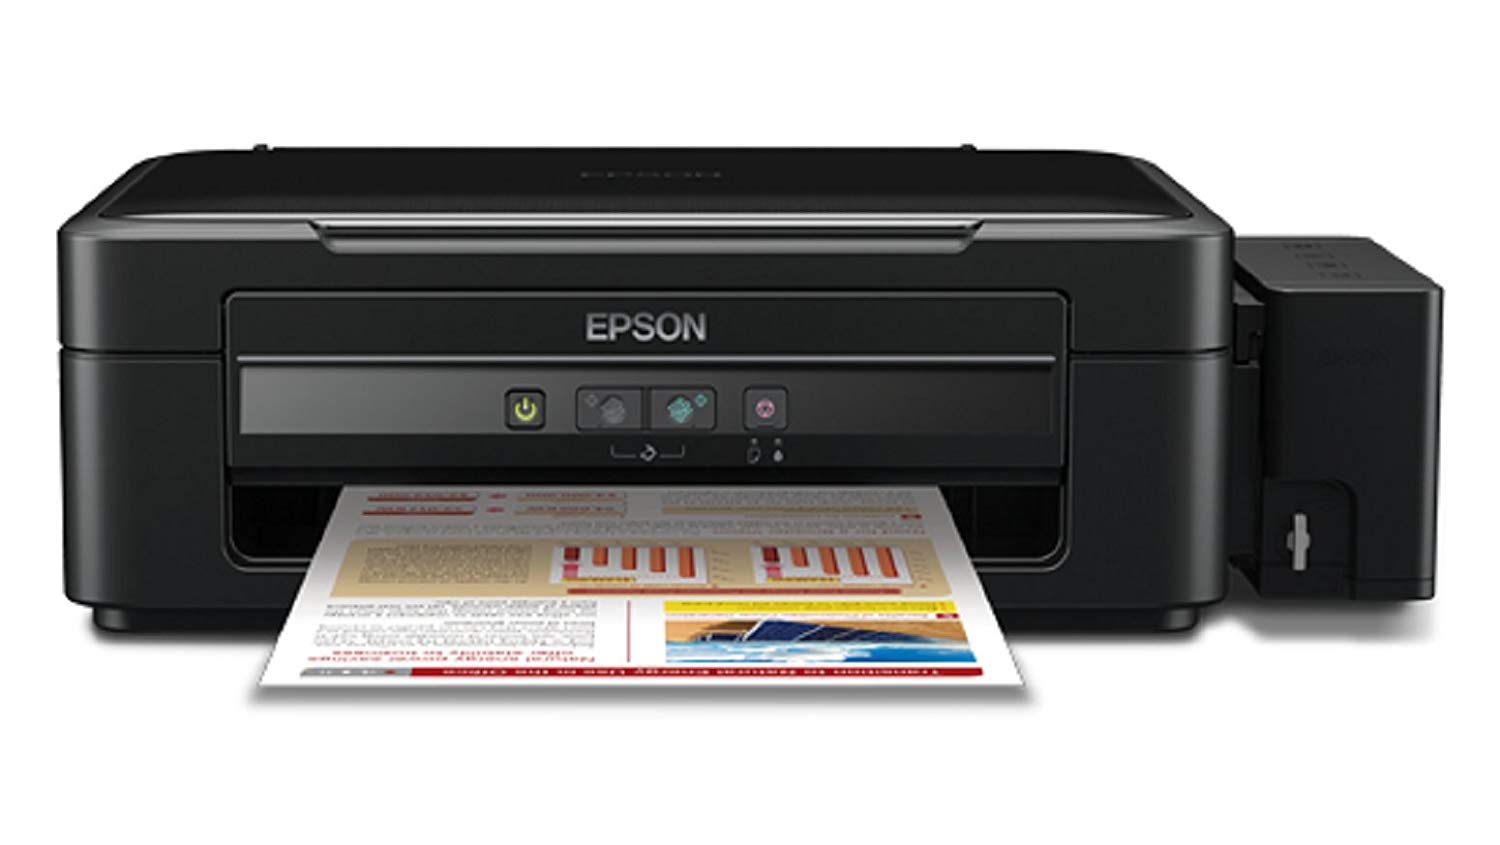 epson l360 ink pad resetter